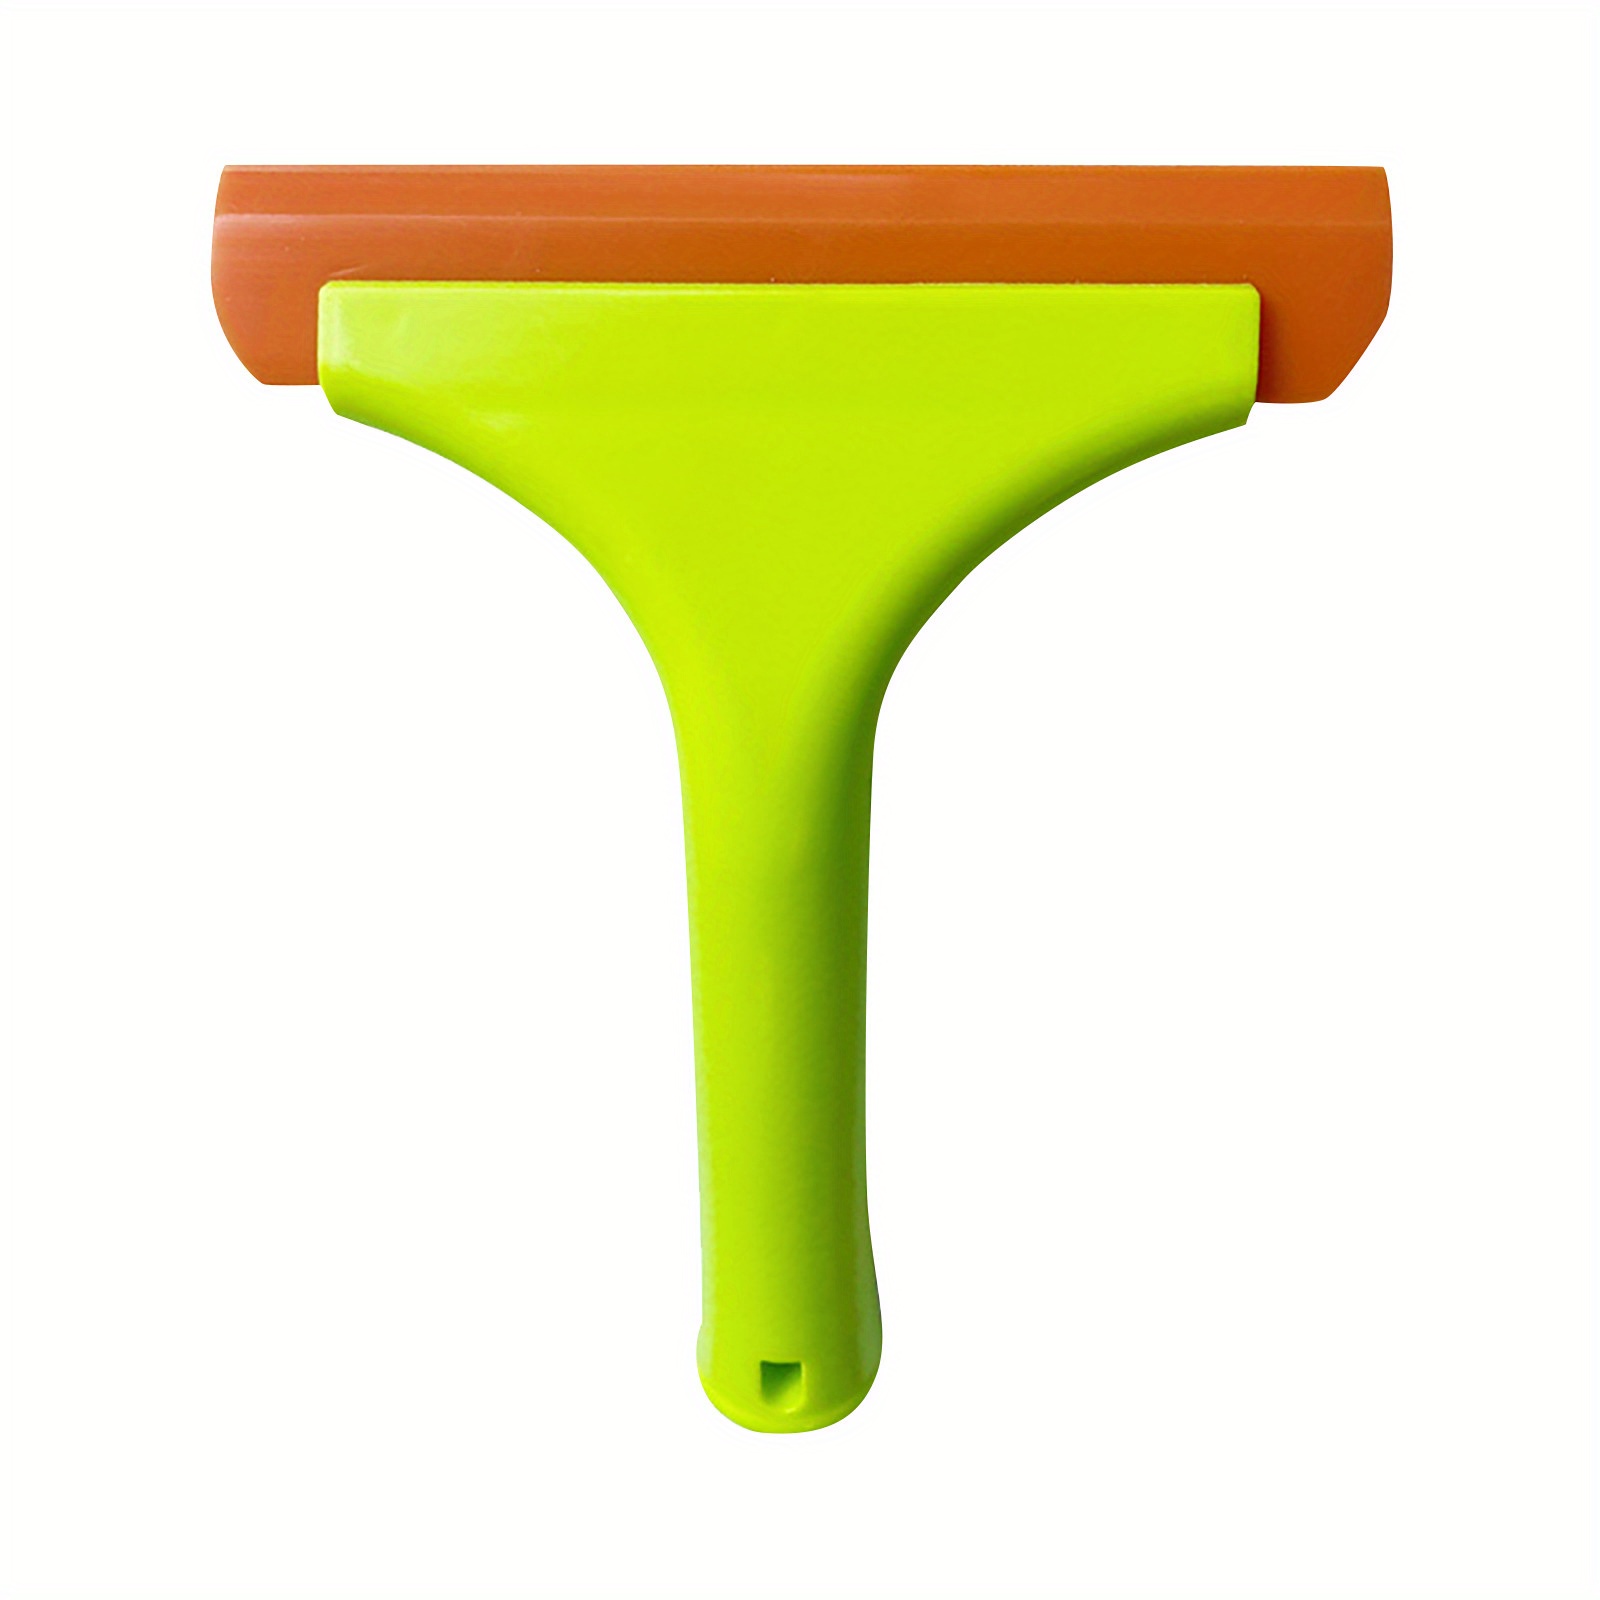 Reusable Silicone Glass Wiper Shower Squeegee For Glass - Temu